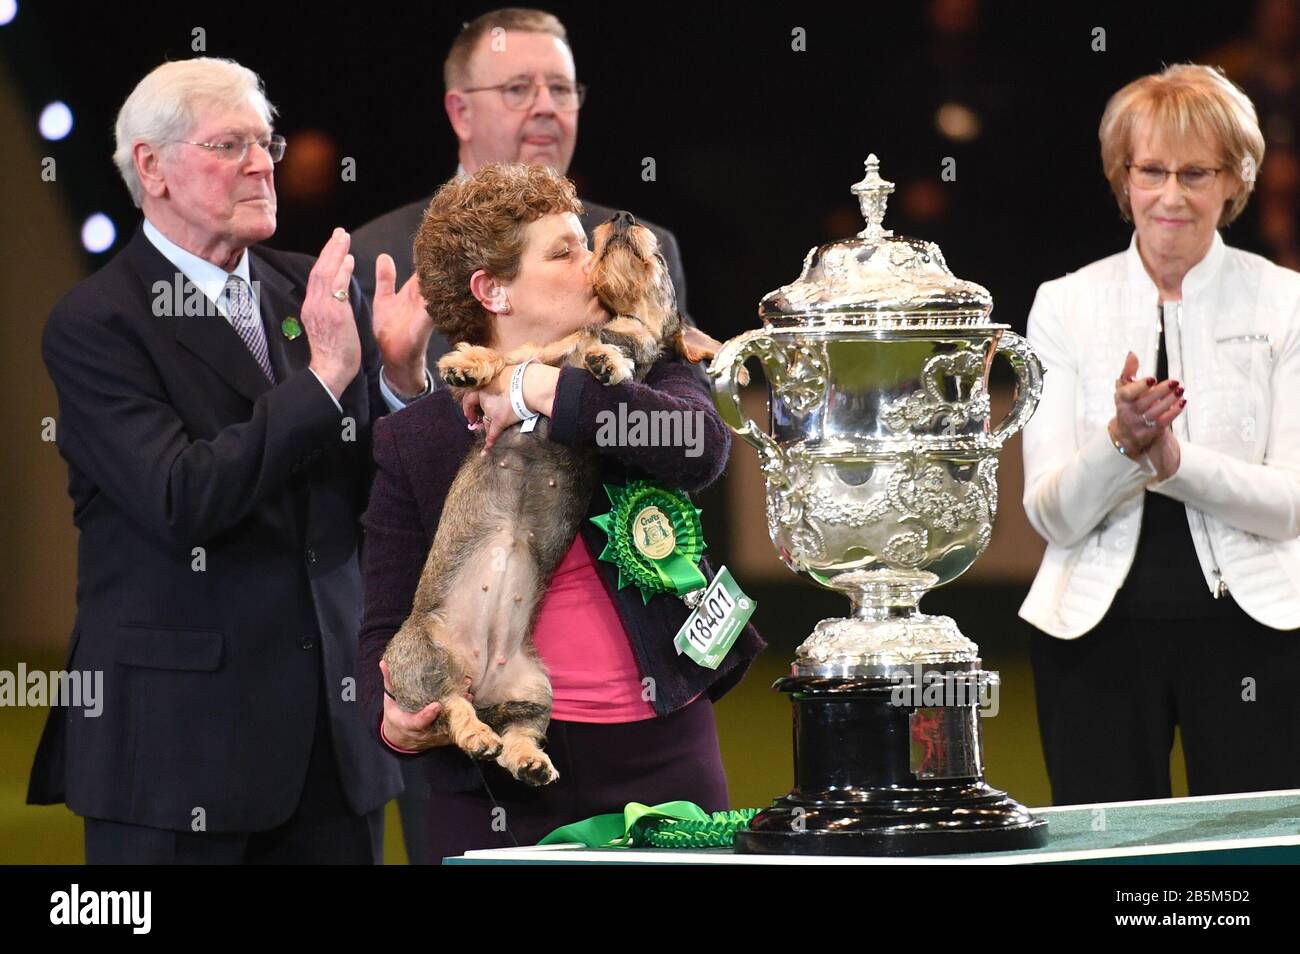 Maisie the Wire-haired Dachshund winner of Best in Show 2020 at the Birmingham National with her owner Kim McCalmont and presenter Peter Purvis (left) at the Exhibition Centre (NEC) during the Crufts Dog Show. Stock Photo